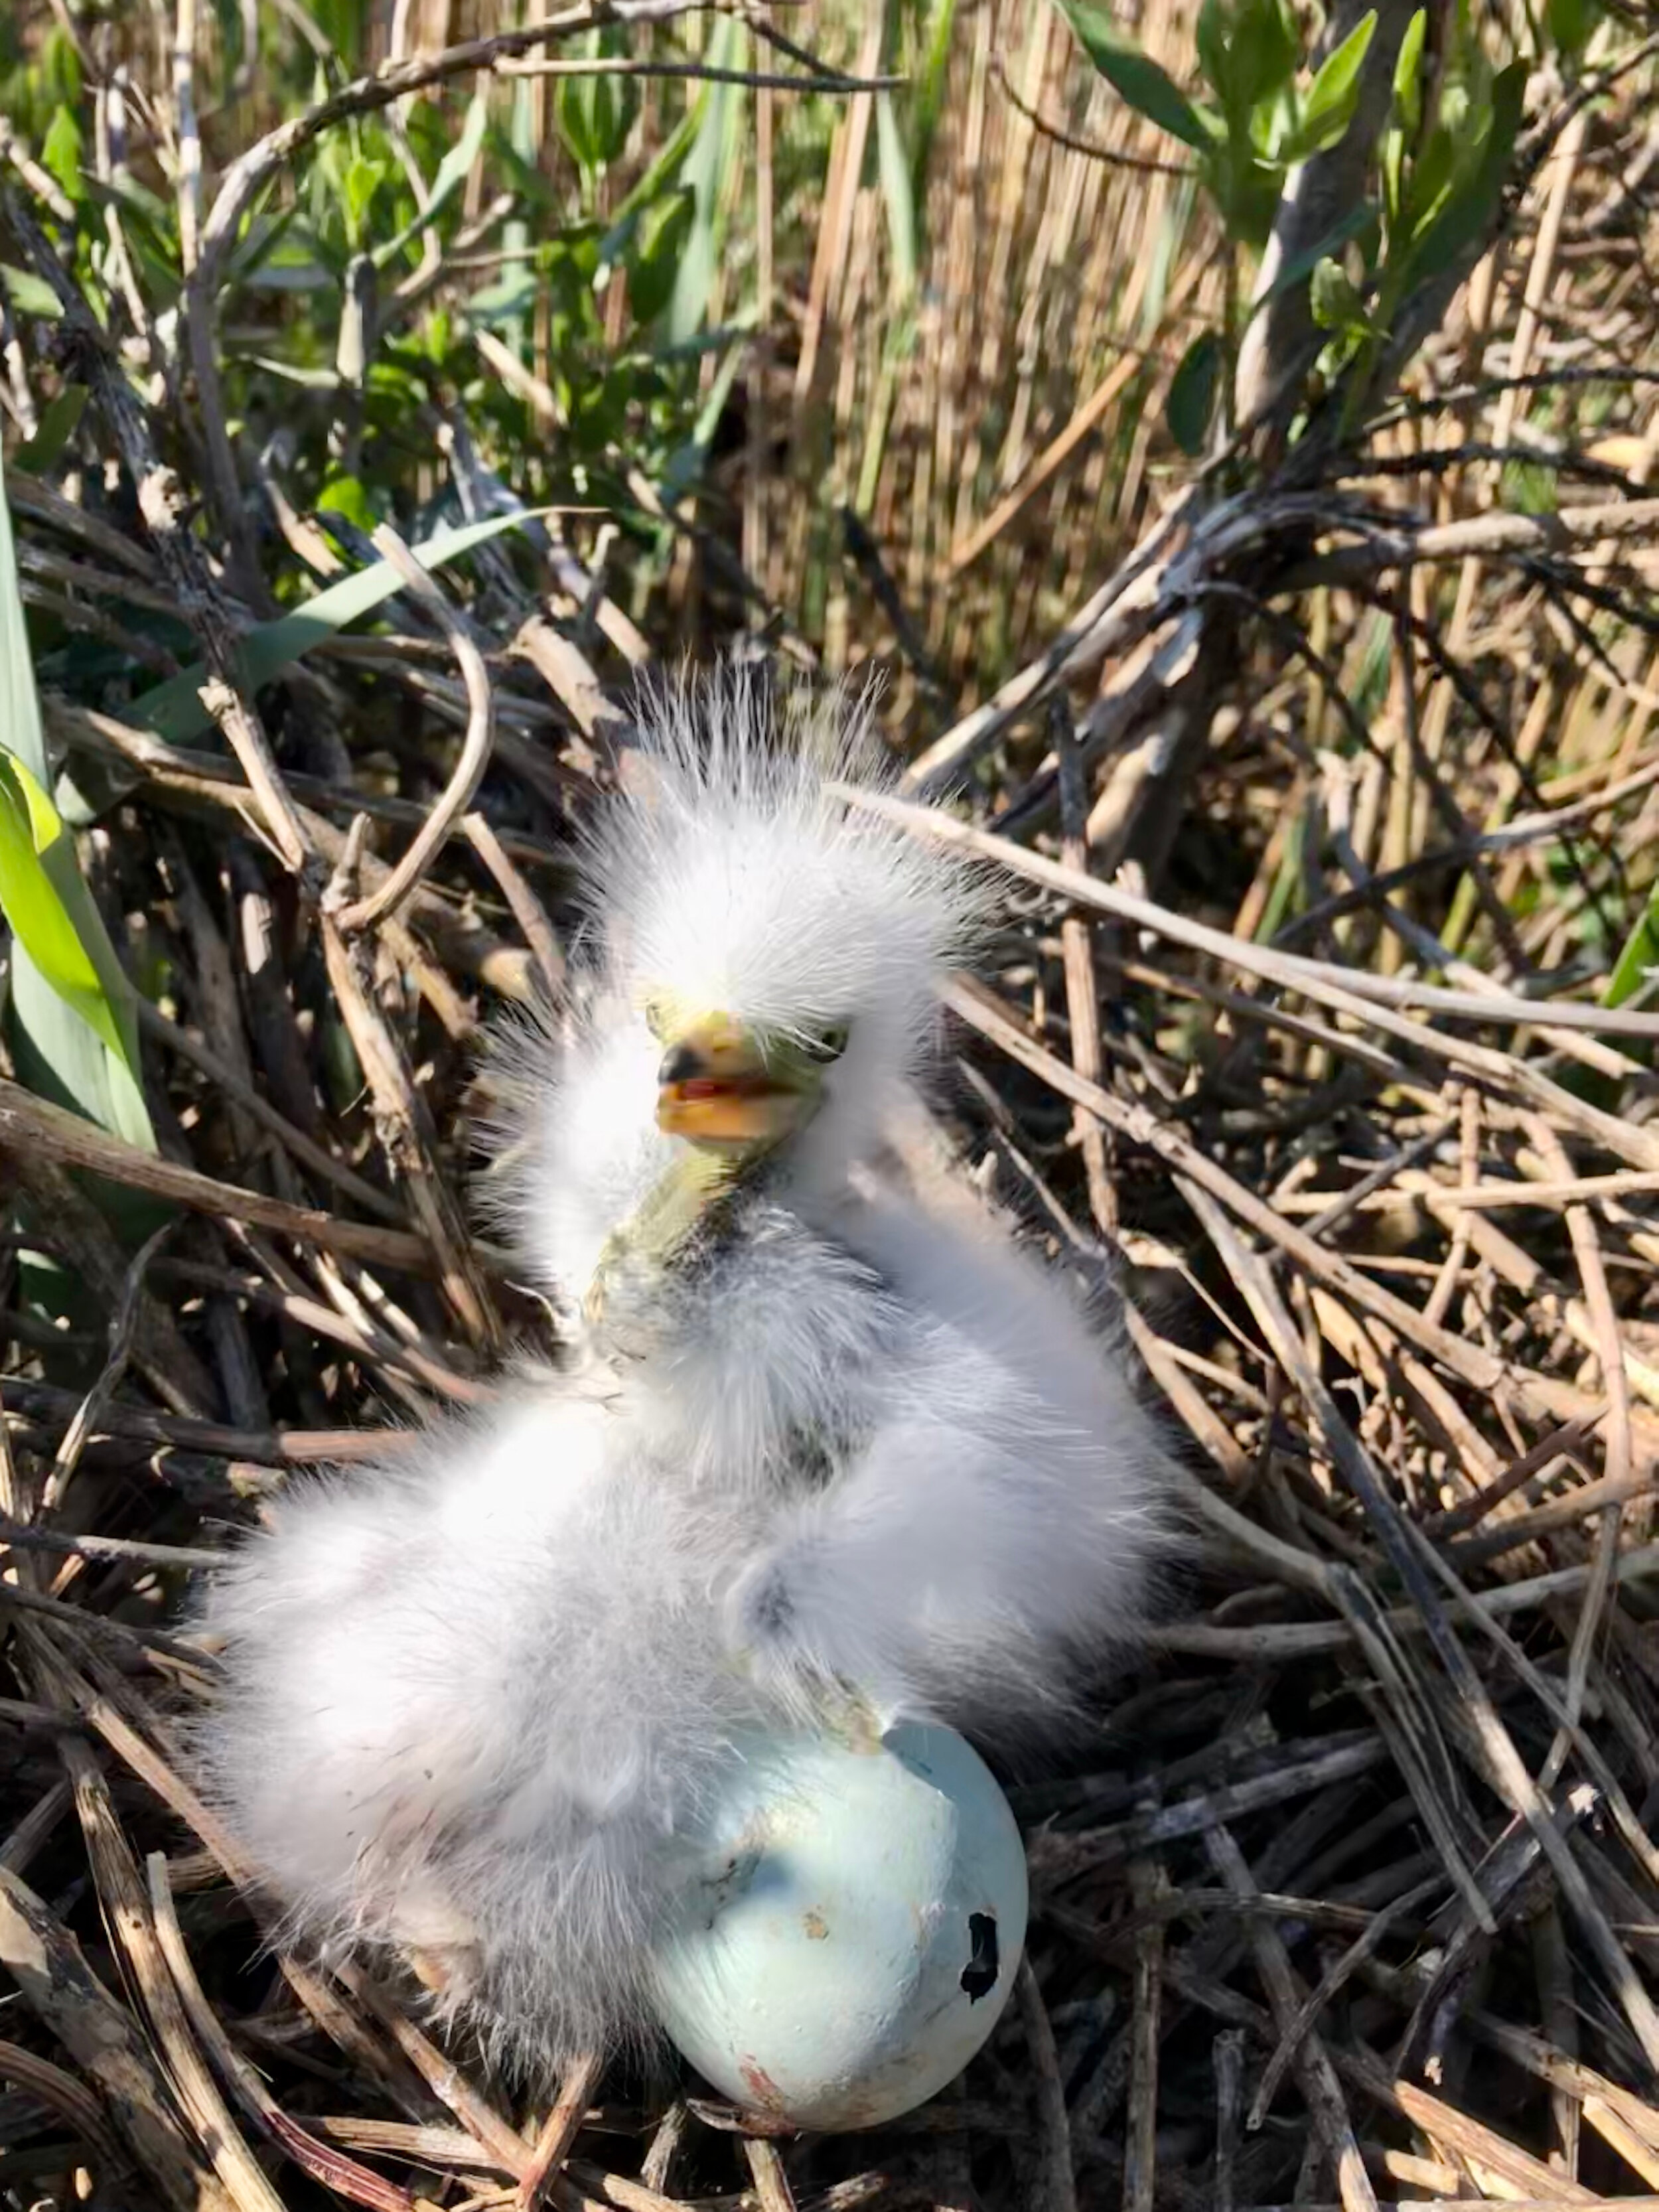 Great egret chick and egg